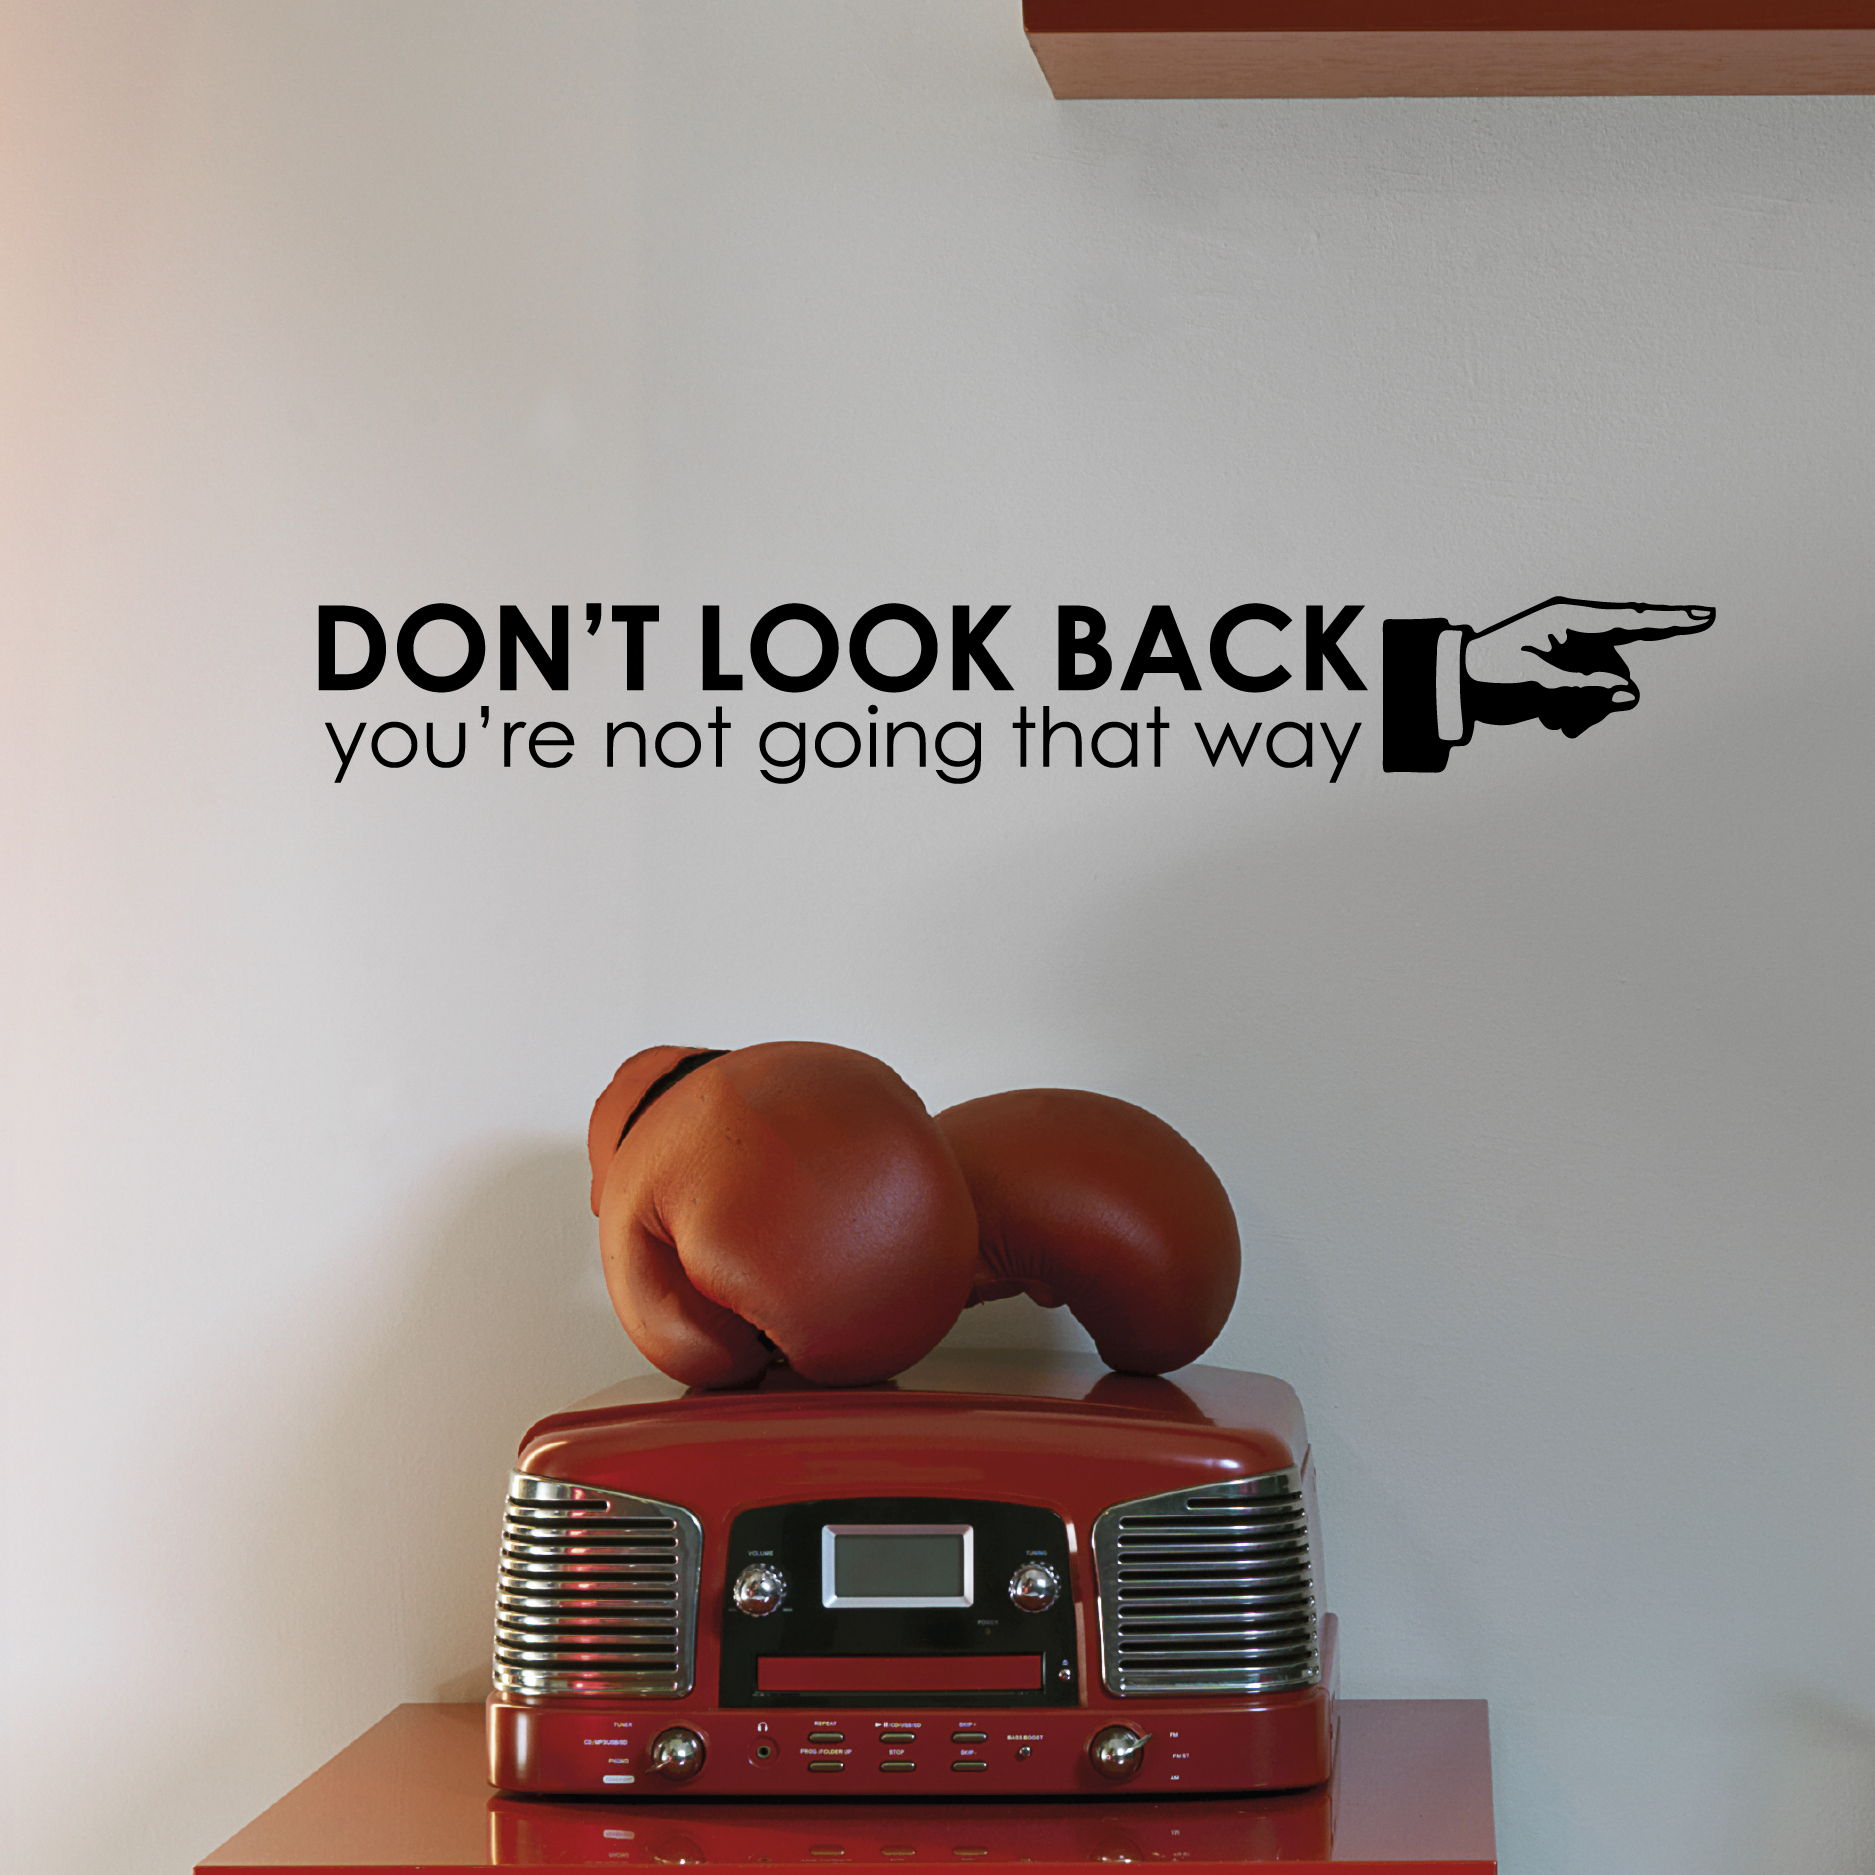 Don t look. Don't look back игра. Streets - don't look back. Boston - don't look back. Dont back